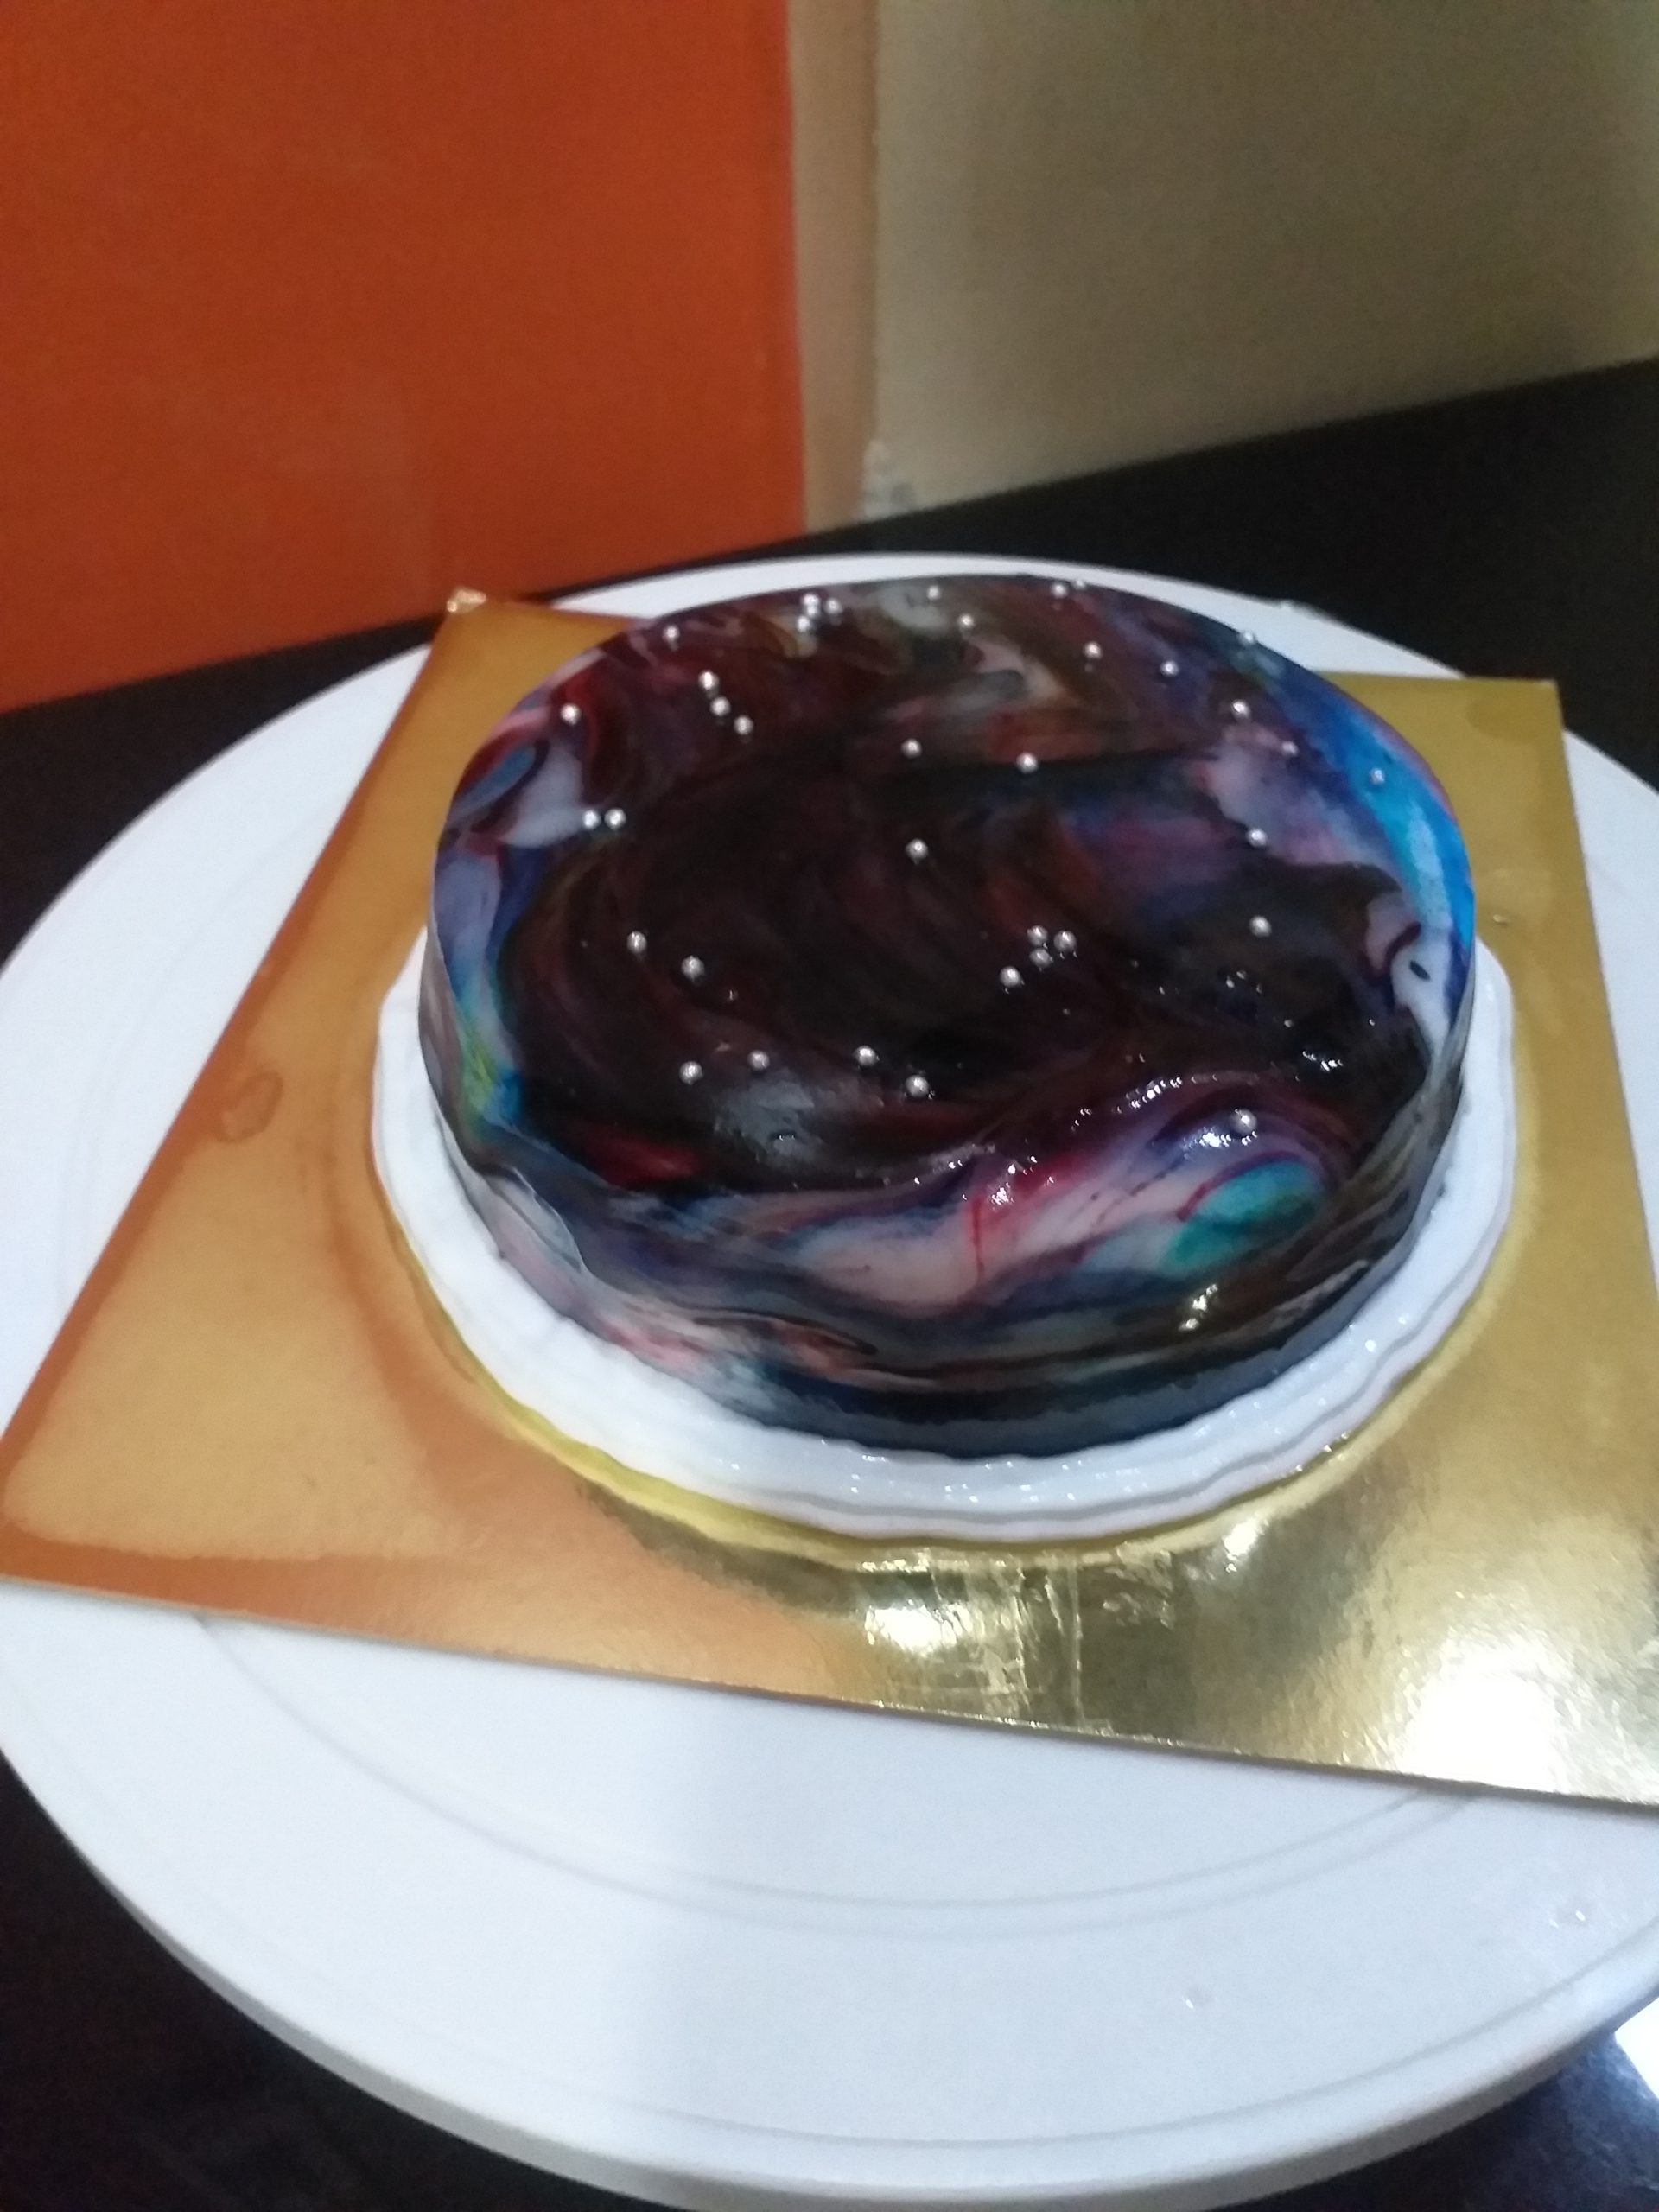 Marble Effect Cake Designs, Images, Price Near Me